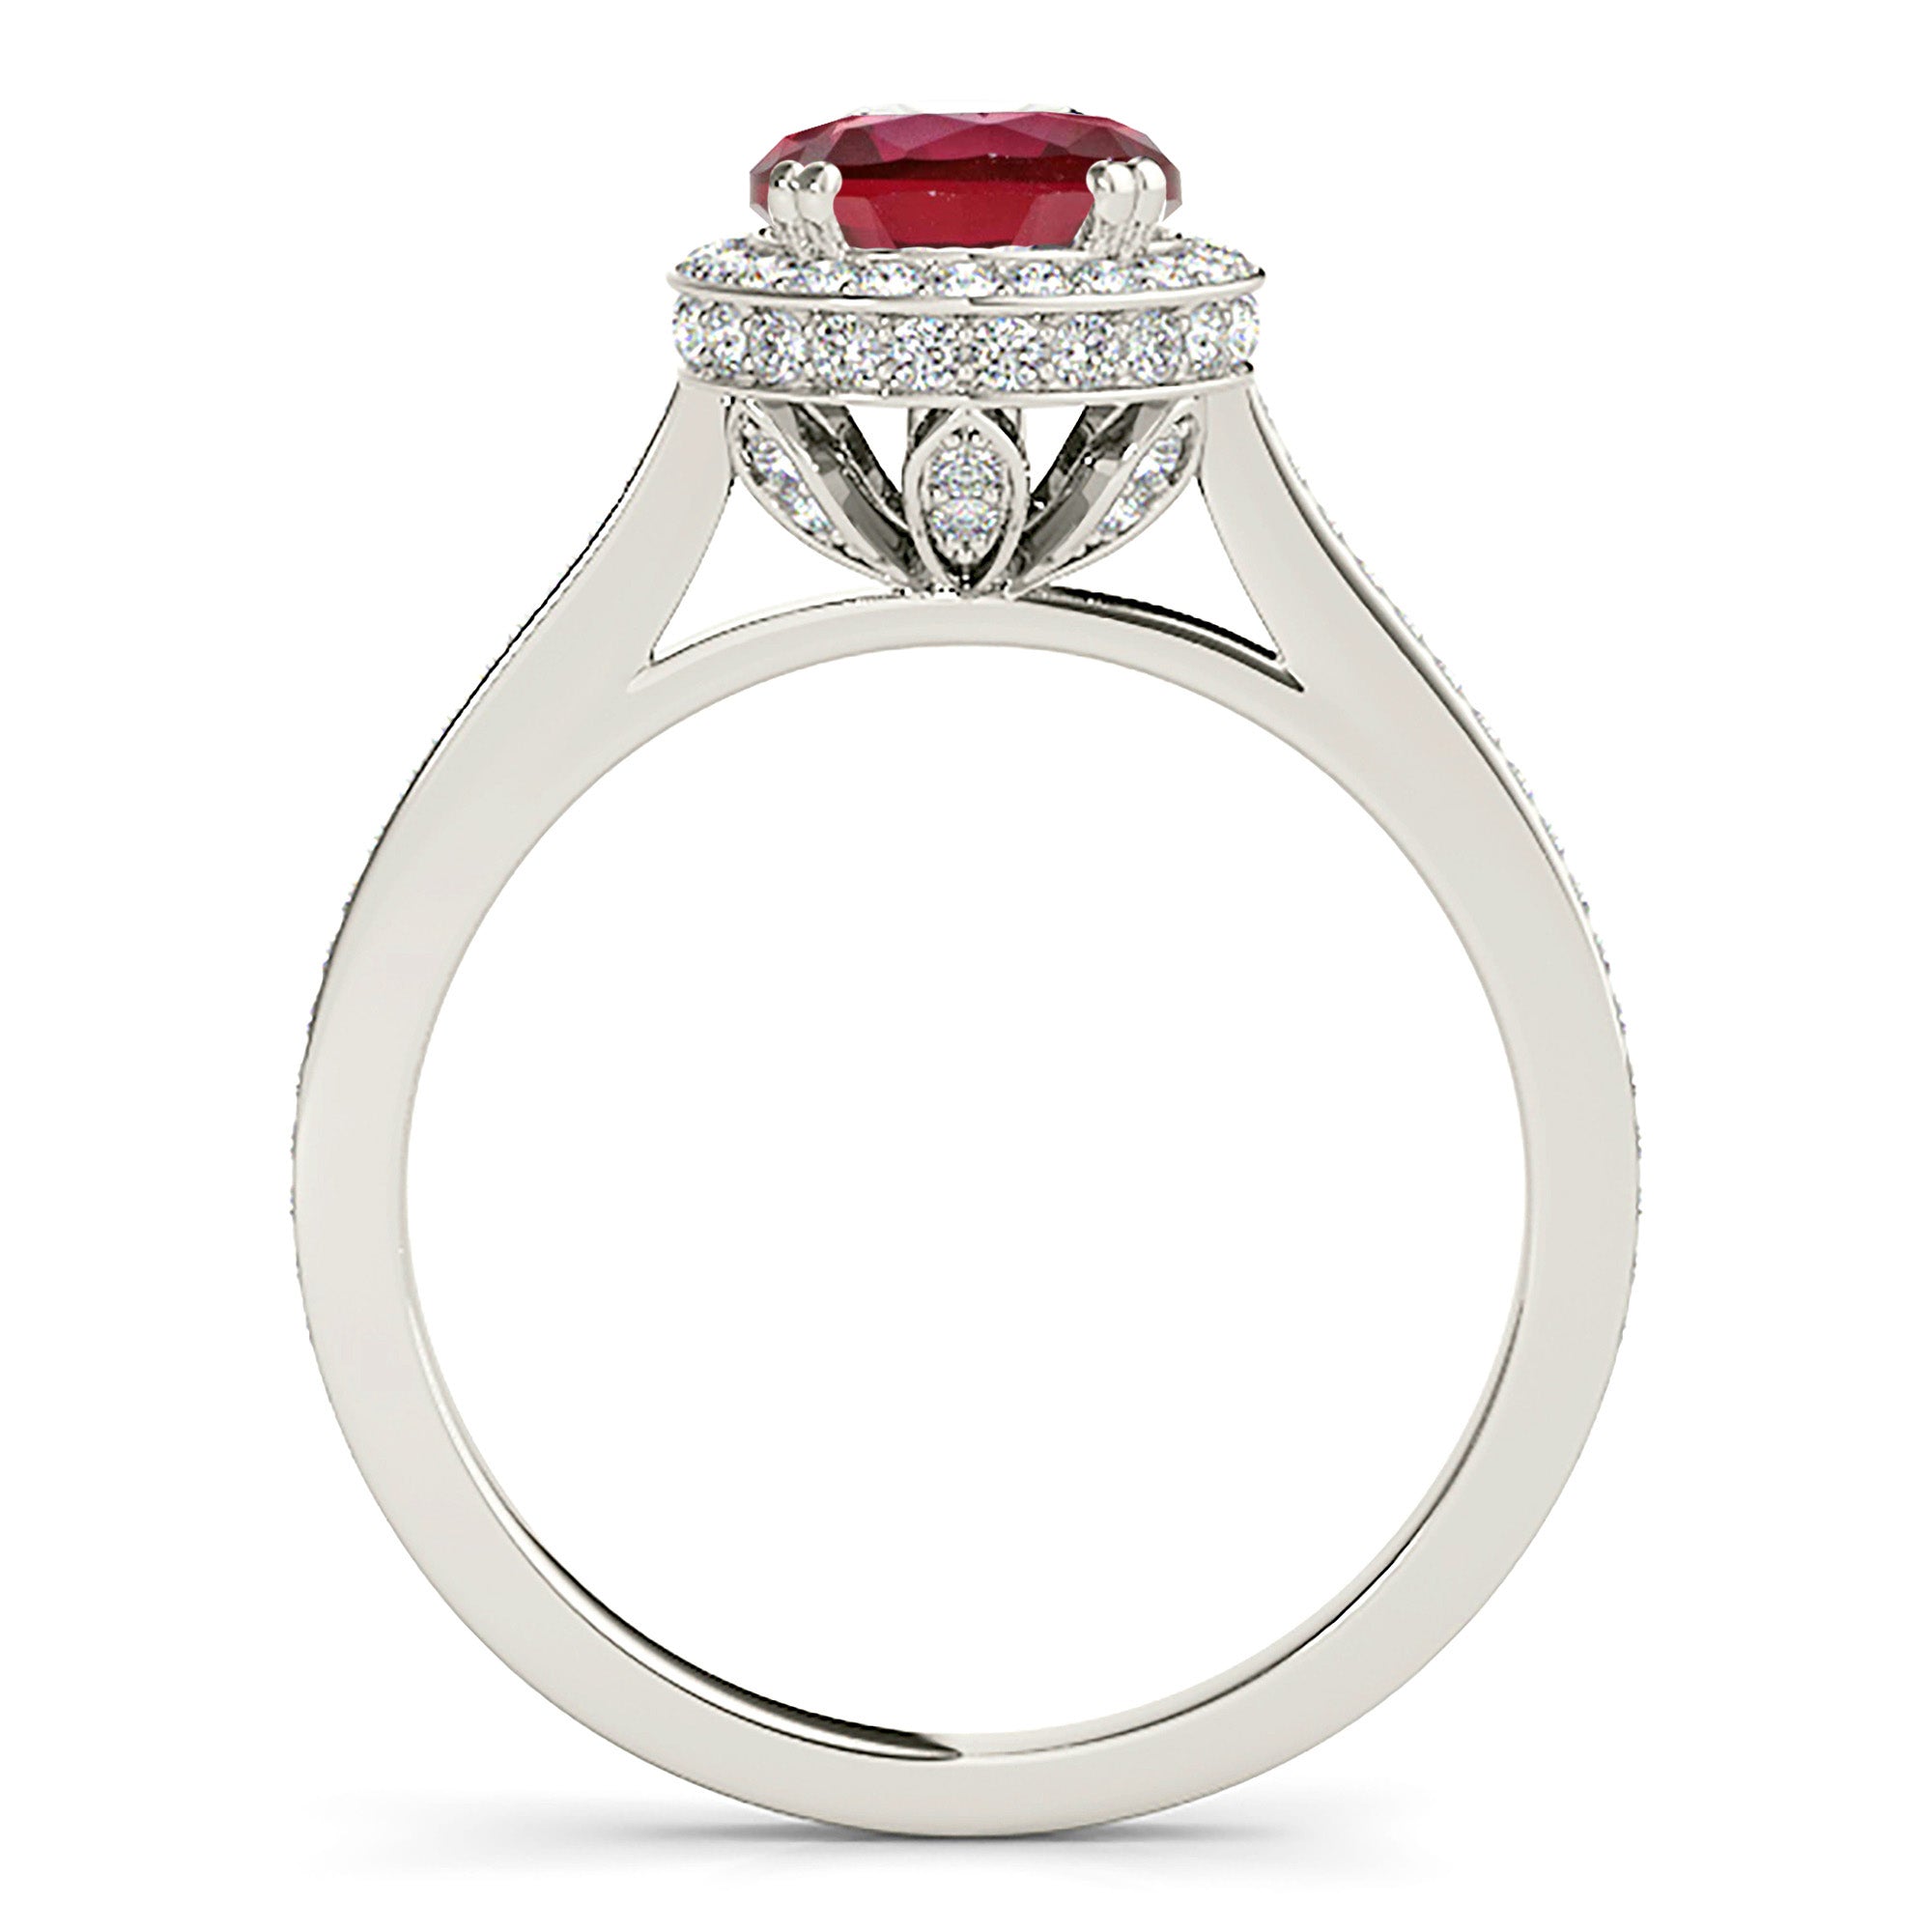 2.35 ct. Genuine Ruby Ring With 0.50 ctw. Diamond Halo And Thin Diamond band, 3D Diamond Halo and Basket| Round Ruby Halo Ring-in 14K/18K White, Yellow, Rose Gold and Platinum - Christmas Jewelry Gift -VIRABYANI